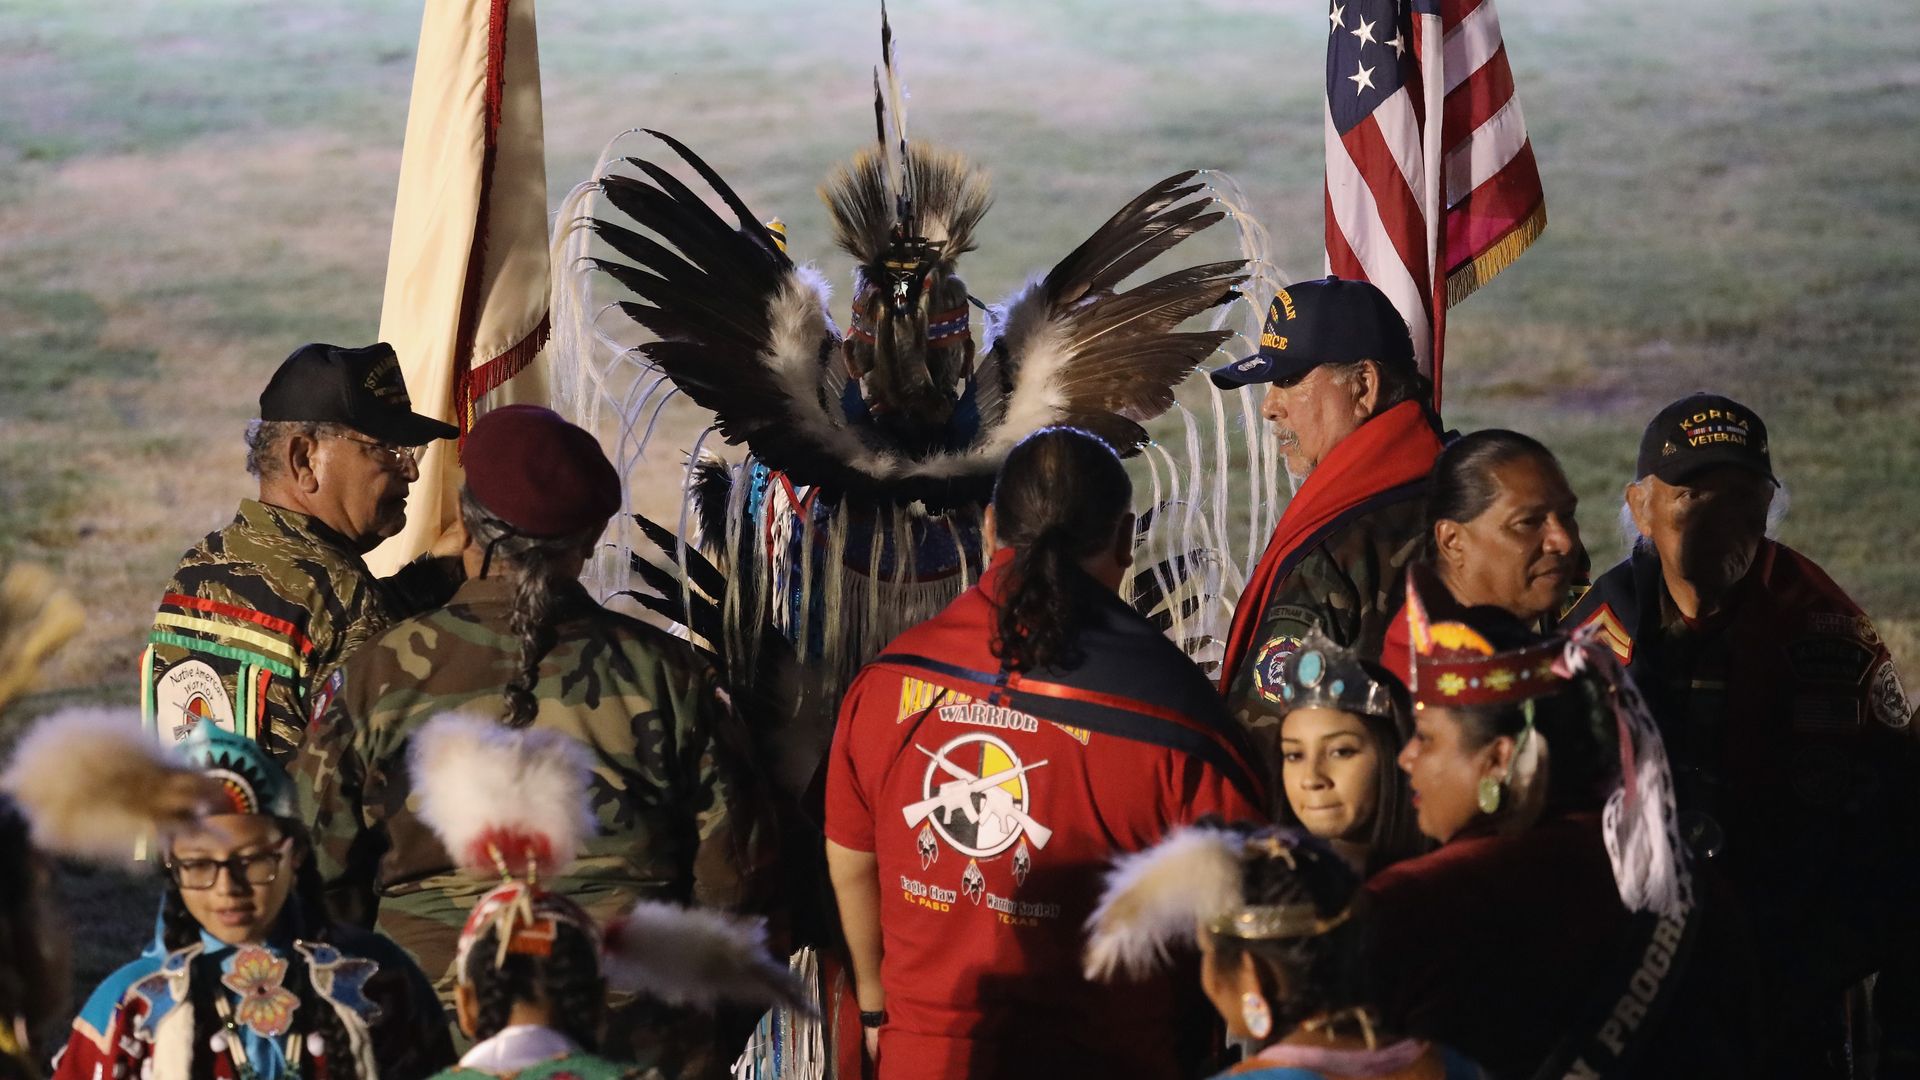 Native American veterans carry U.S. and tribal flags before entering the "Rocking the Rez" Pow Wow in 2016 in Ysleta del Sur Pueblo, Texas.  Photo: John Moore/Getty Images